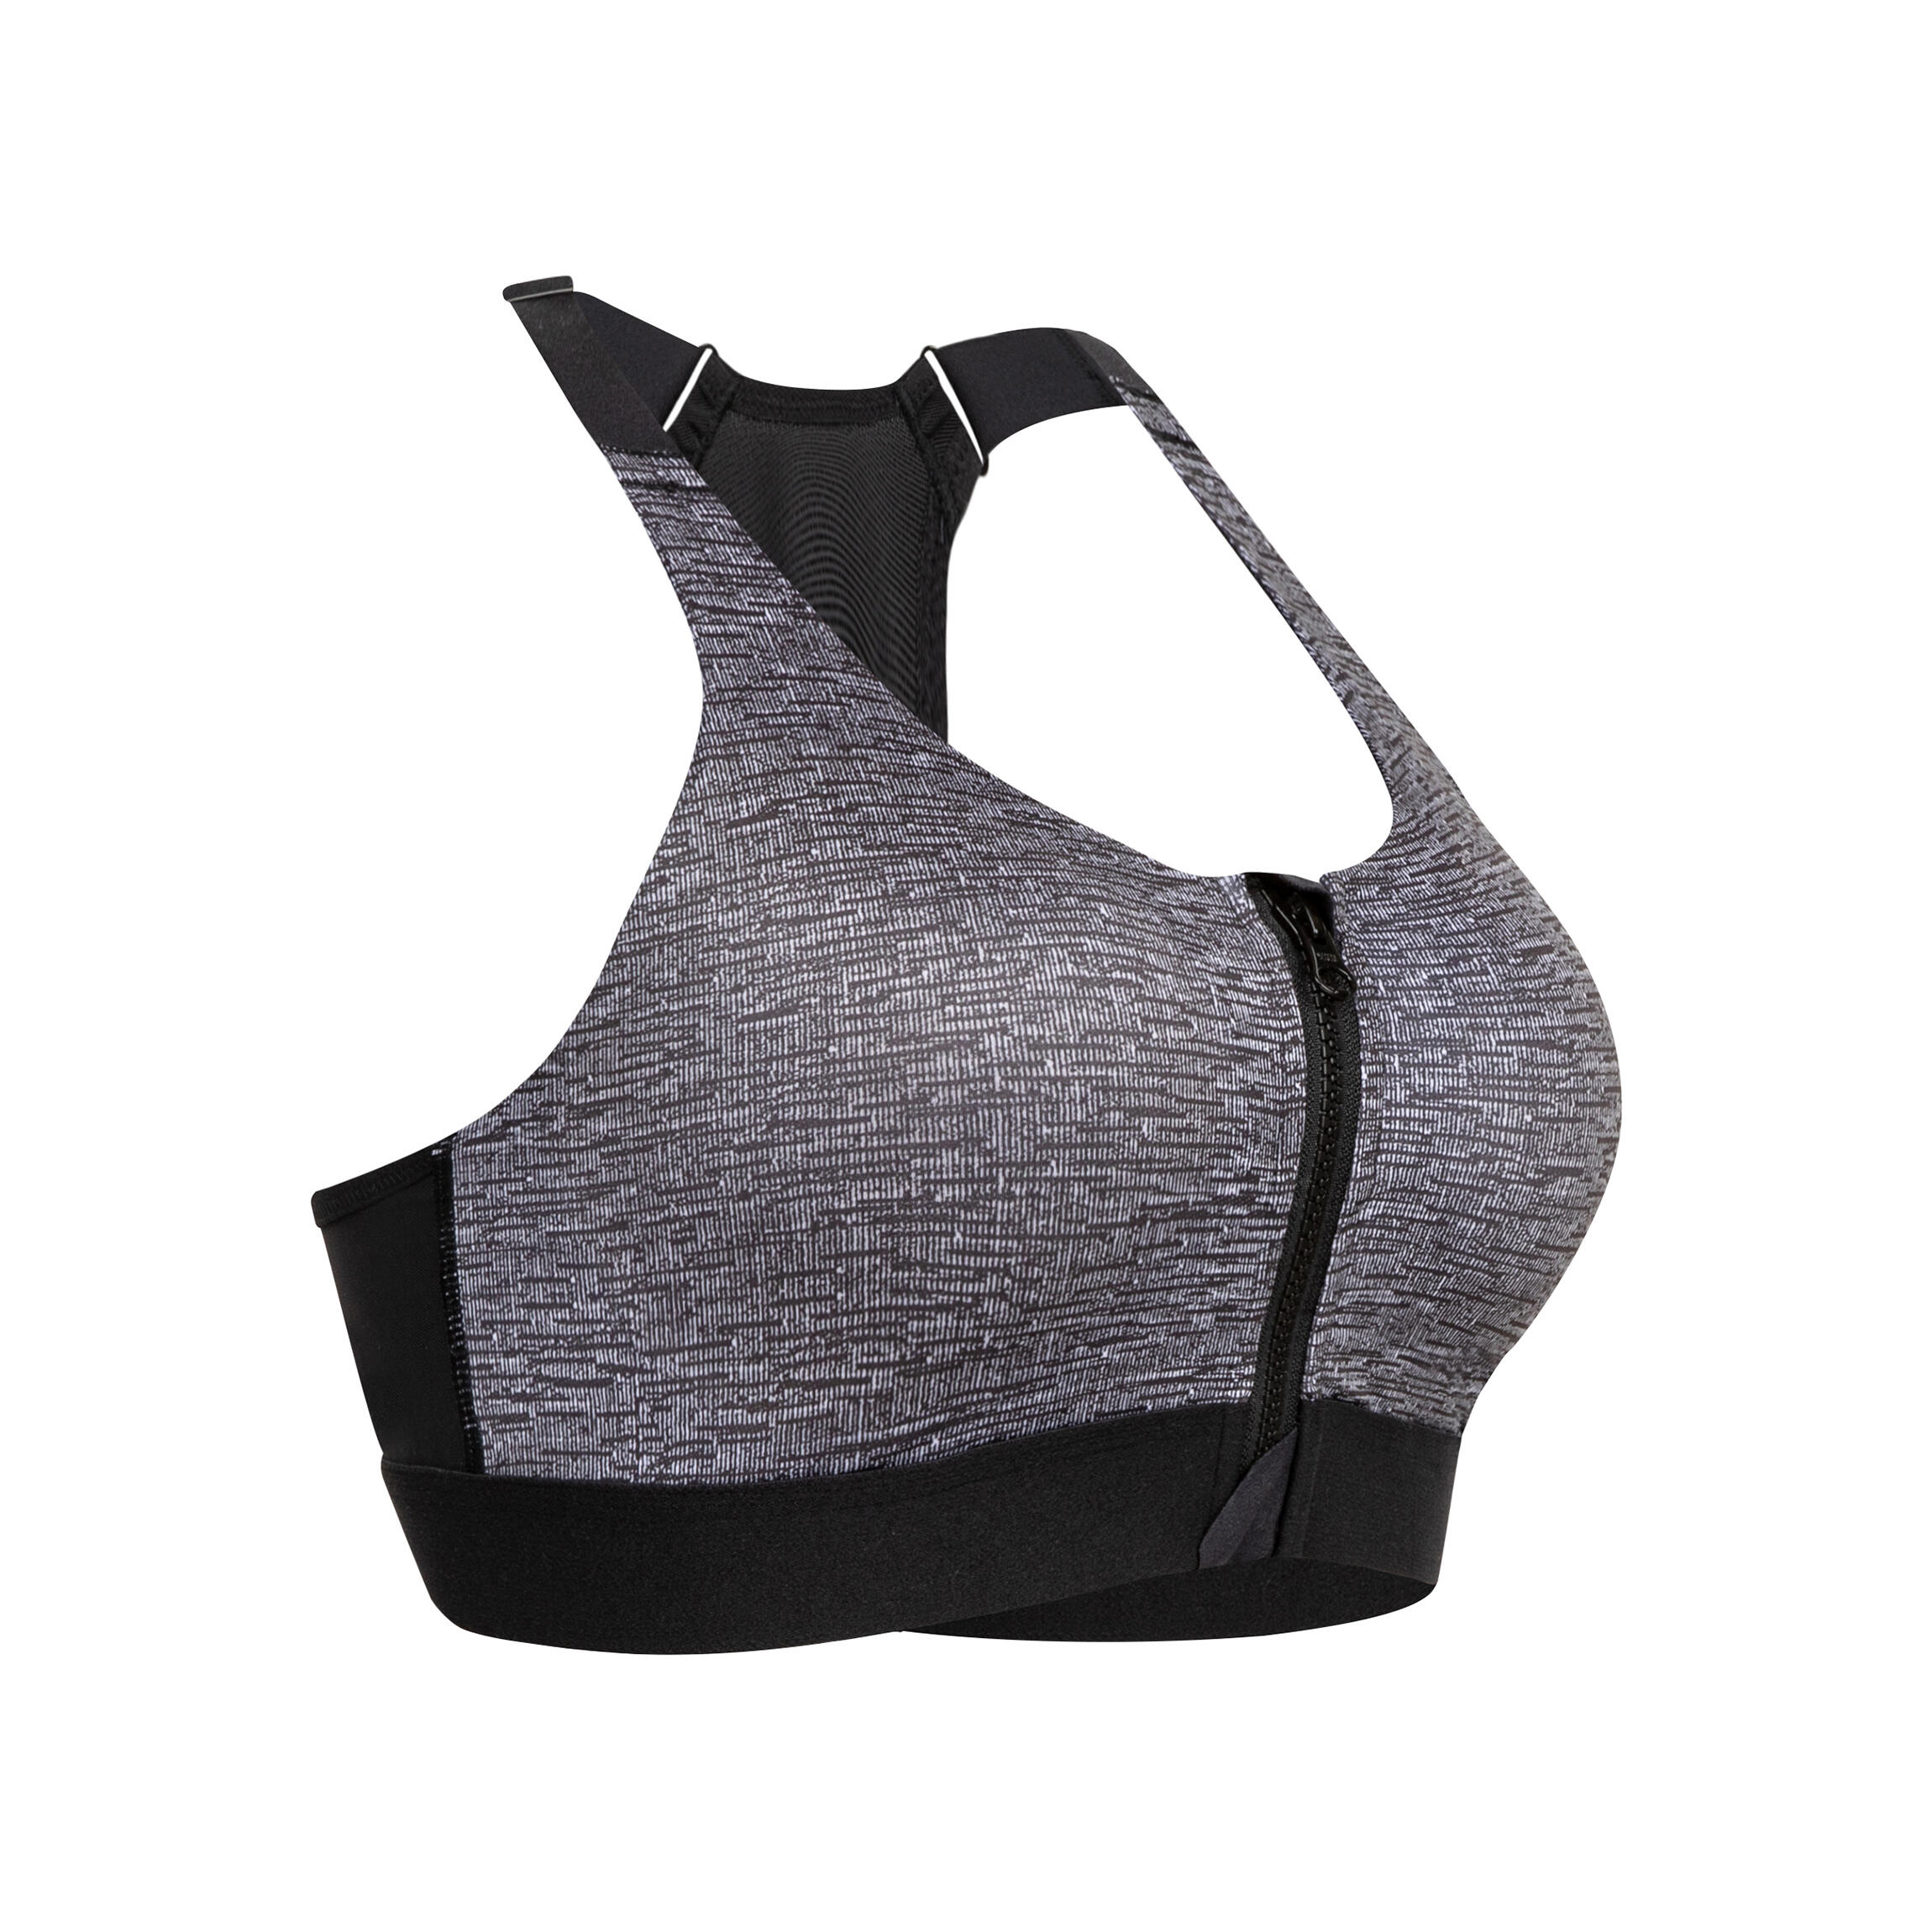 Domyos by Decathlon Women Black Plus Size Superior Support Padded Sports  Bra Price in India, Full Specifications & Offers